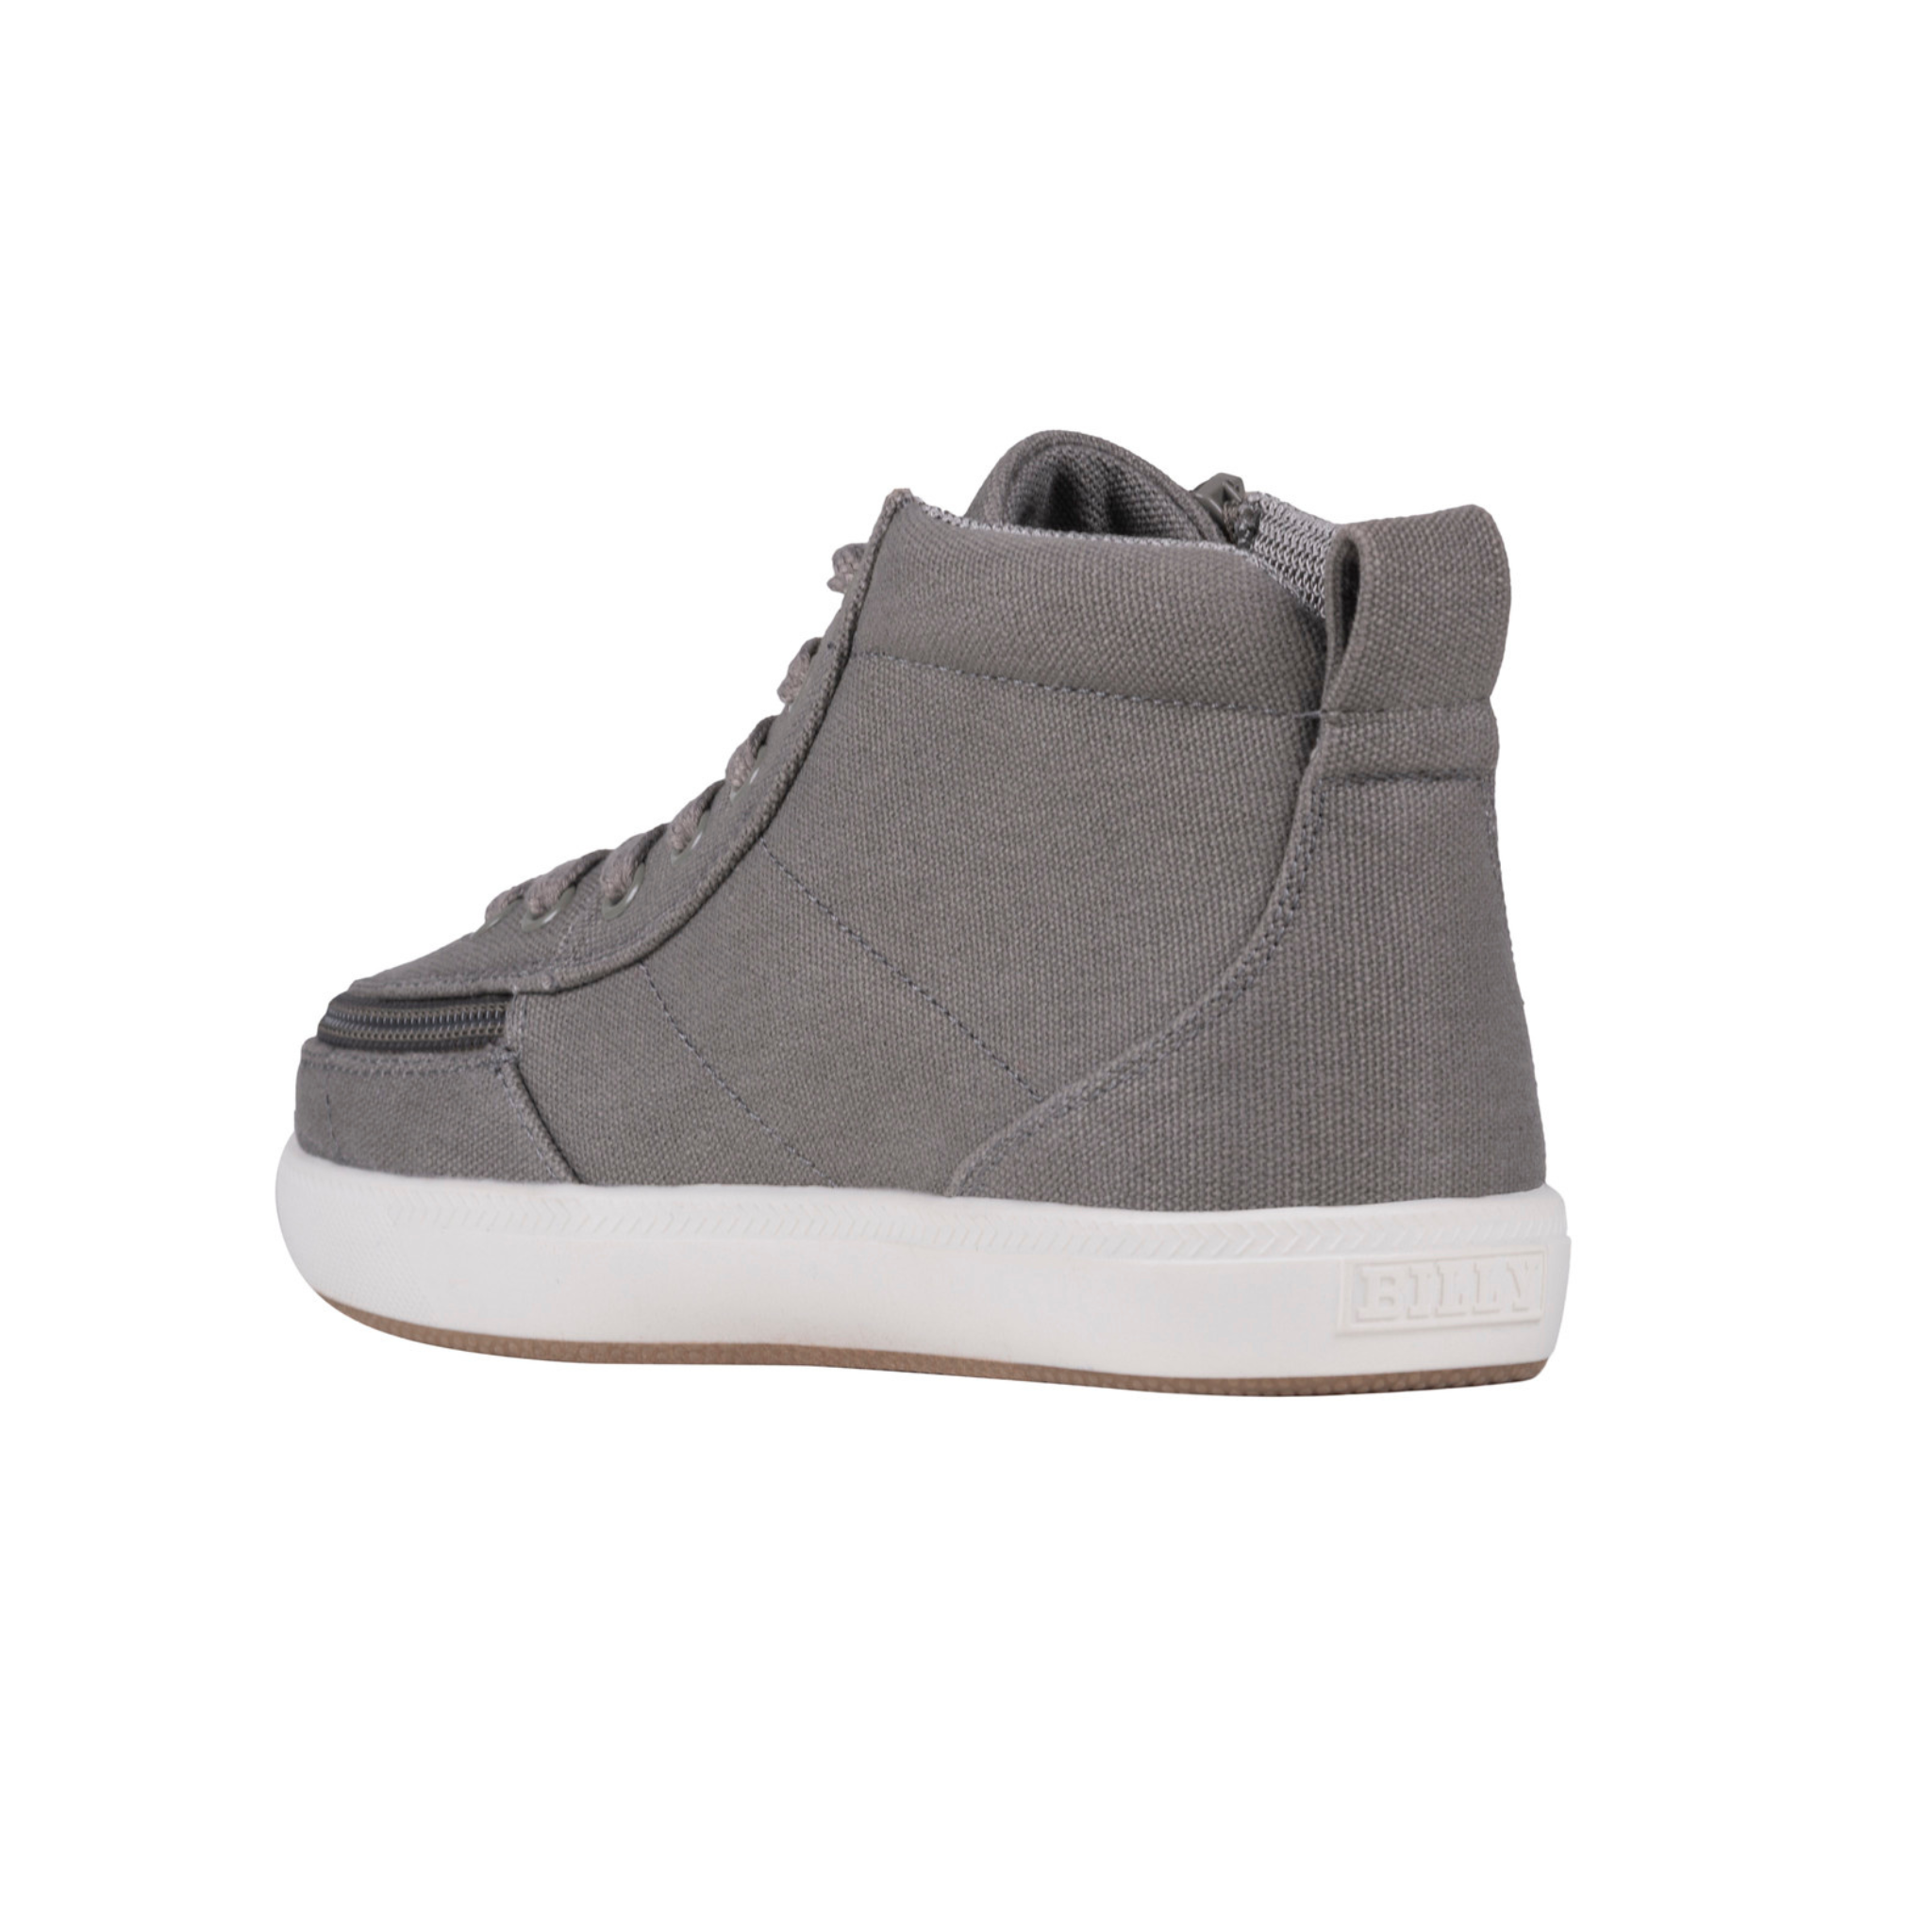 Billy Footwear (Toddlers) DR II Fit - High Top DR II Dark Grey Canvas Shoes